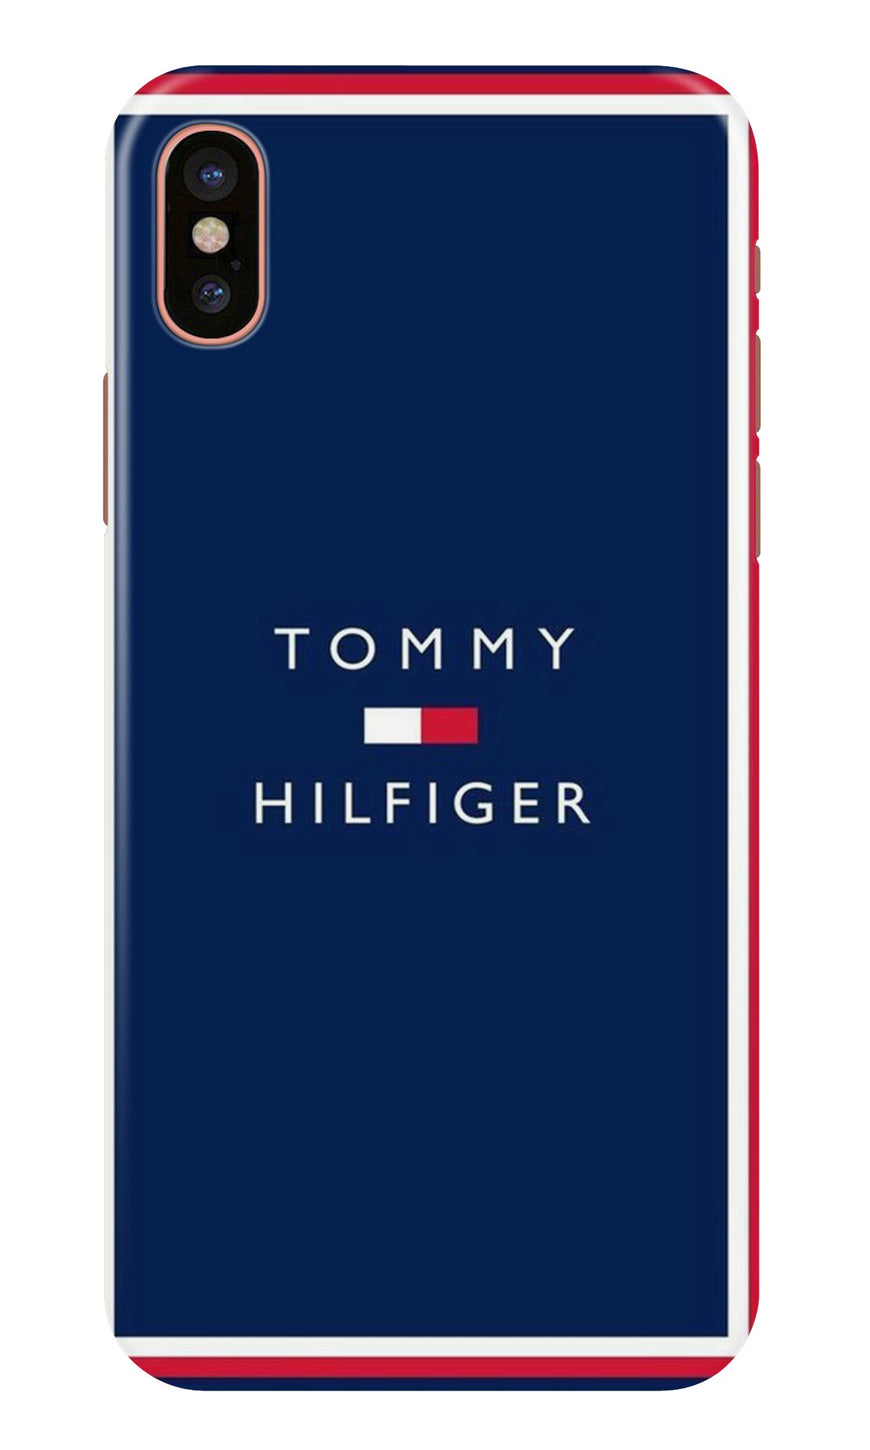 Tommy Hilfiger Case for iPhone Xs (Design No. 275)